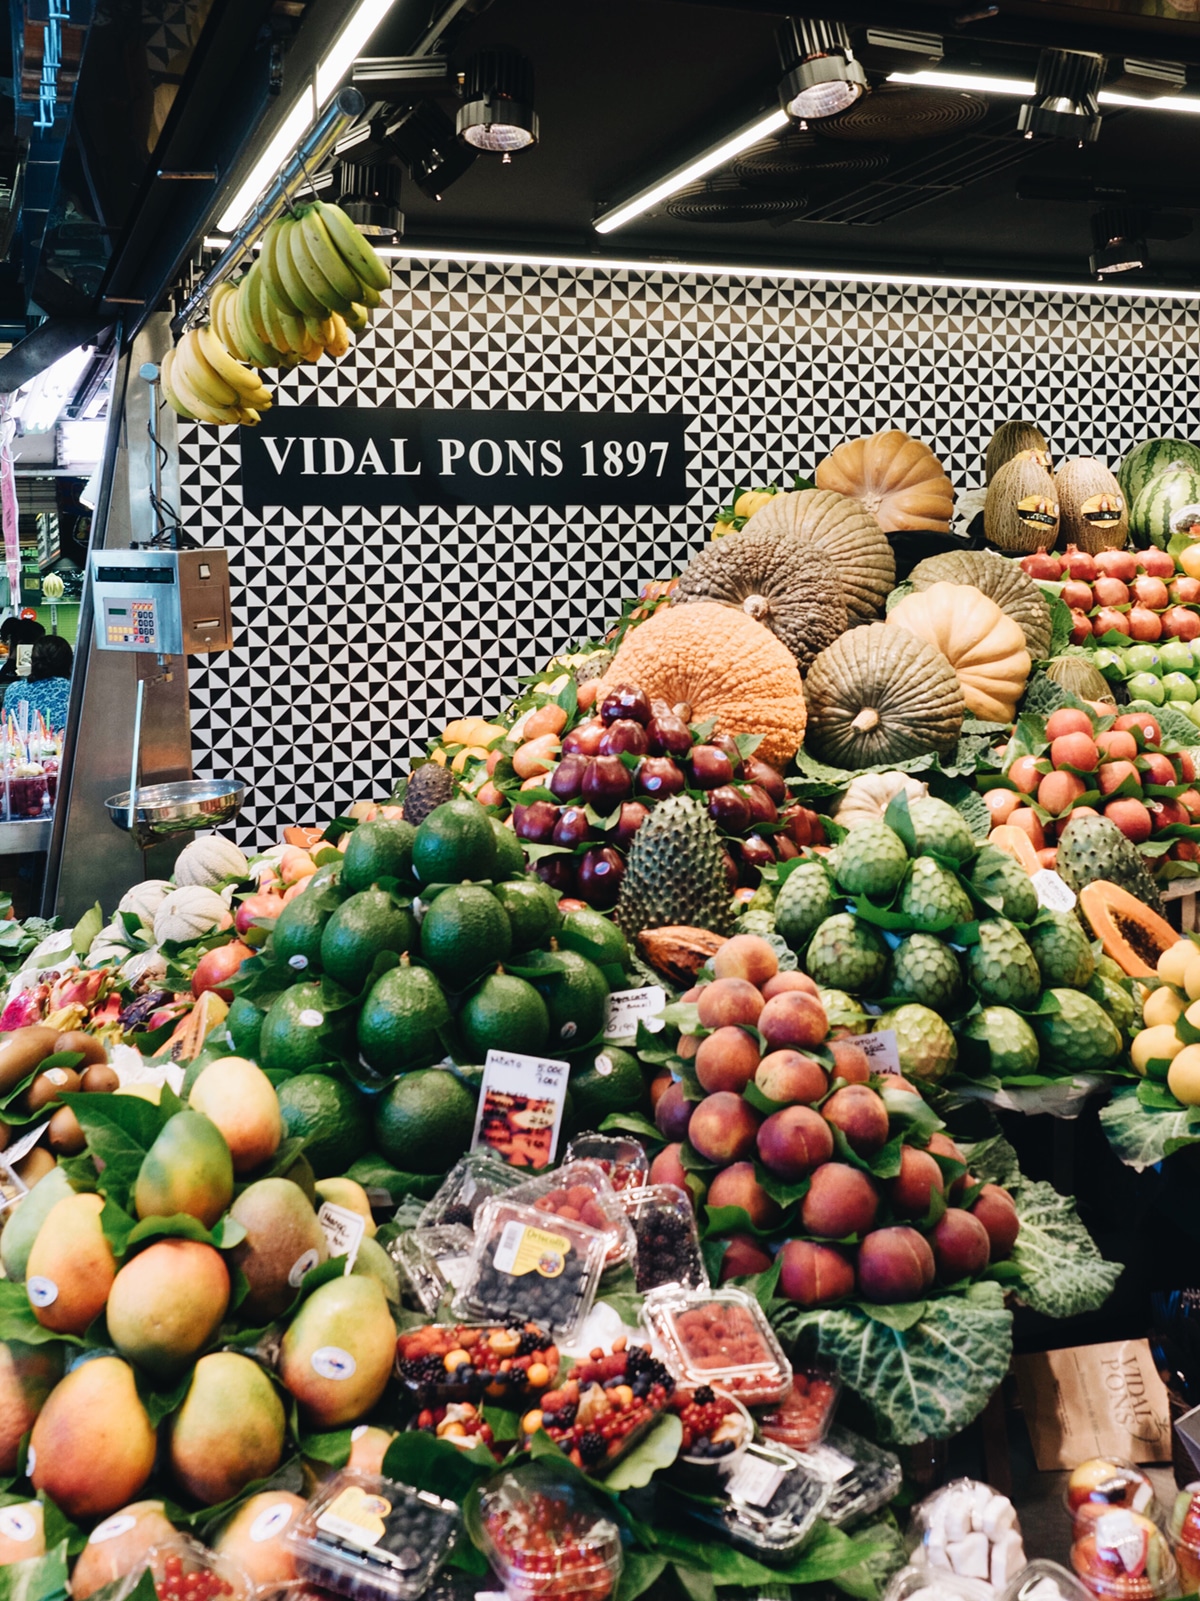 stacked fruit stands in la boqueria market | barcelona travel guide on coco kelley